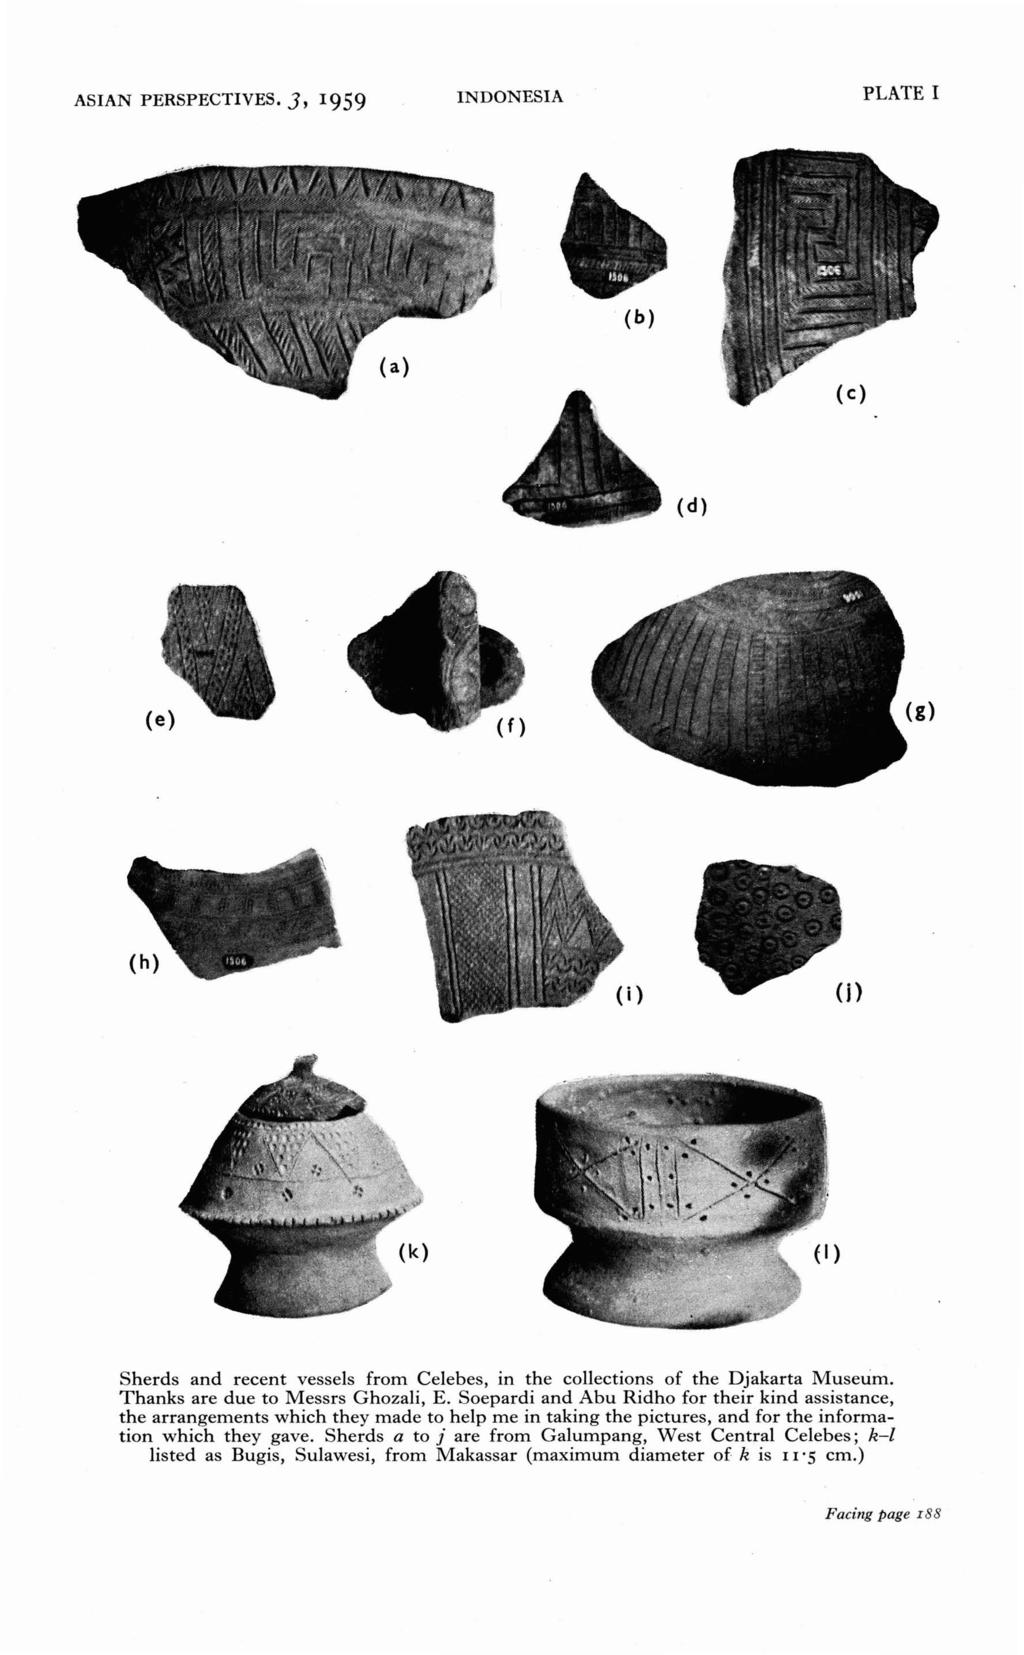 ASIAN PERSPECTIVES. 3, 1959 INDONESIA PLATE I (b) (d) Sherds and recent vessels from Celebes, in the collections of the Djakarta Museum. Thanks are due to Messrs Ghozali, E.